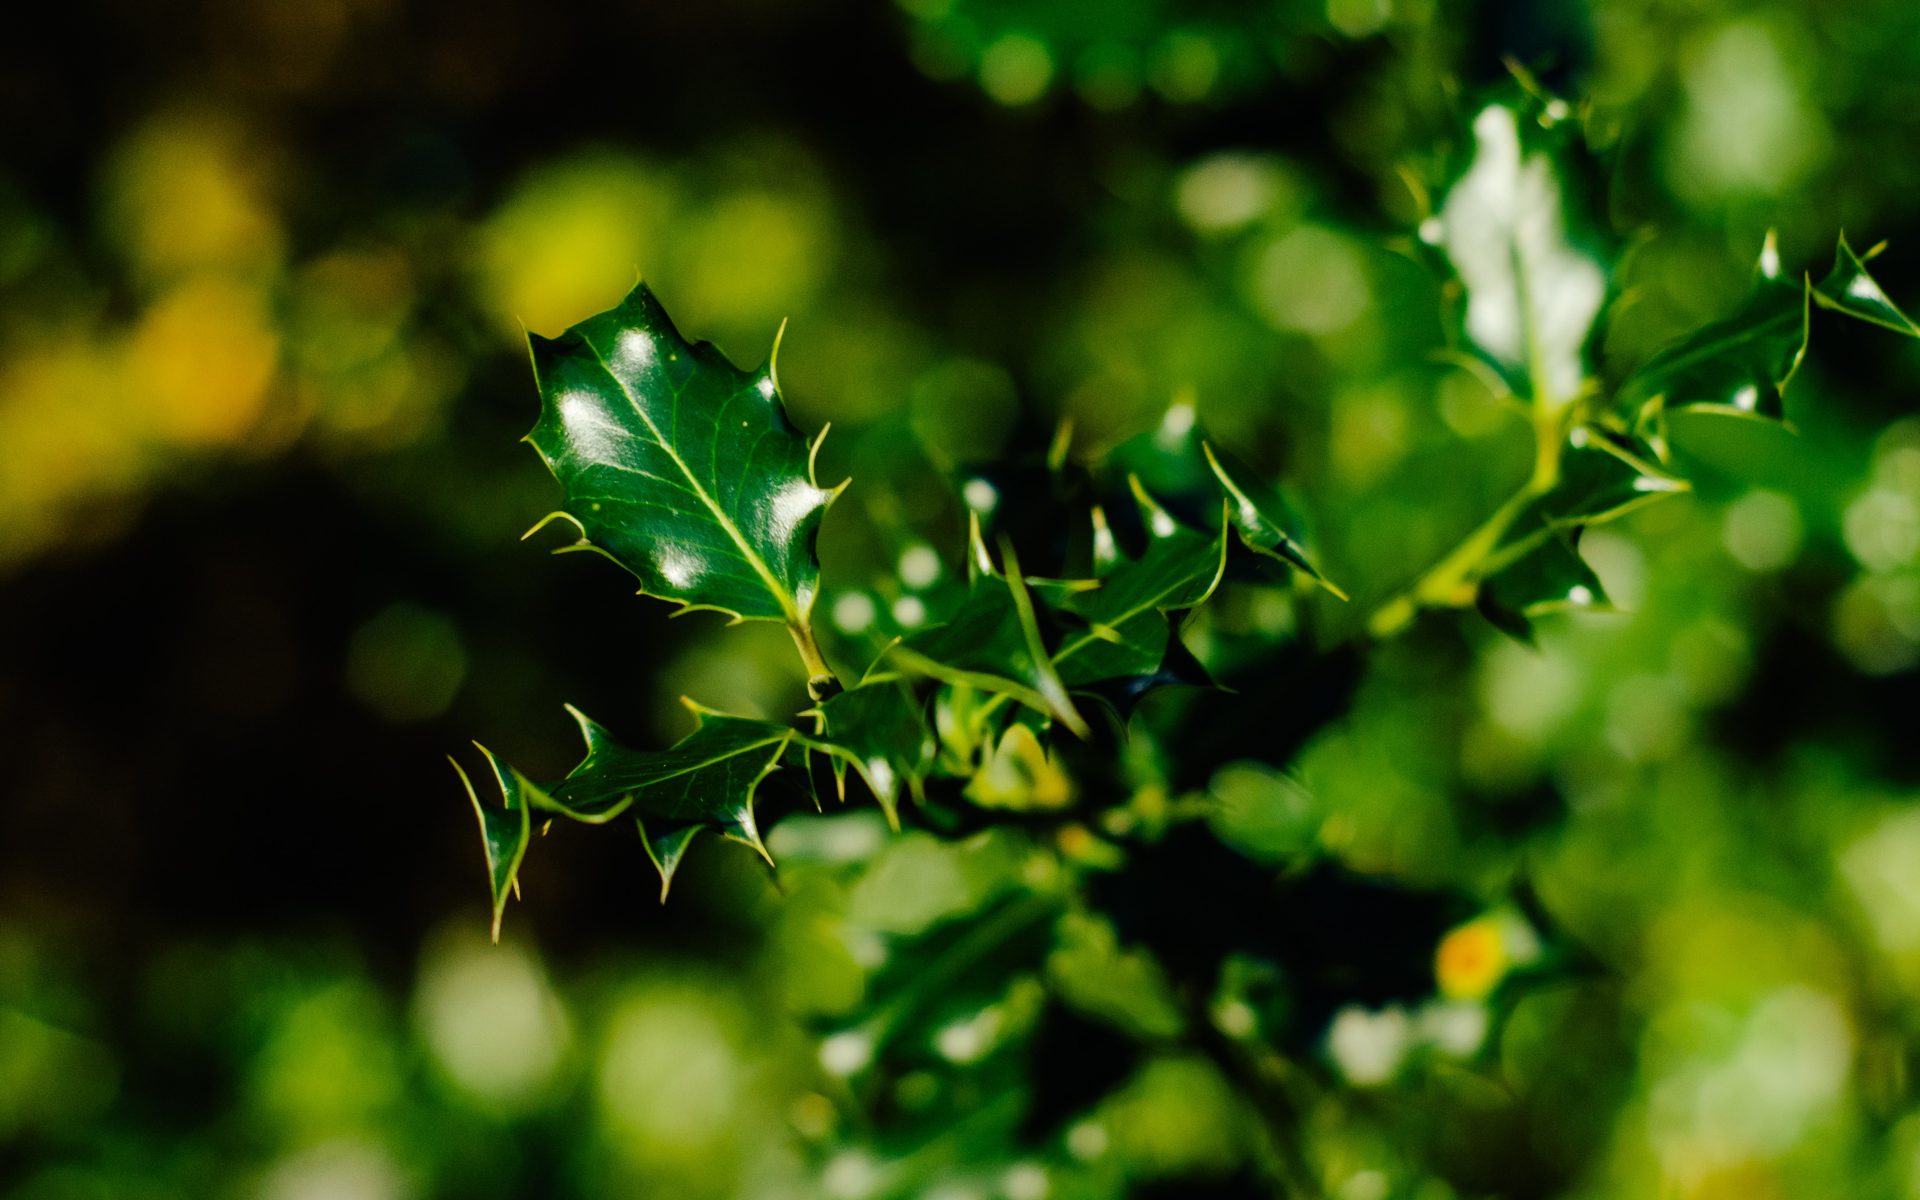 The rediscovery of the Pernambuco holly tree is also a significant step forward towards restoring the ecological functions and services of the Atlantic Forest.